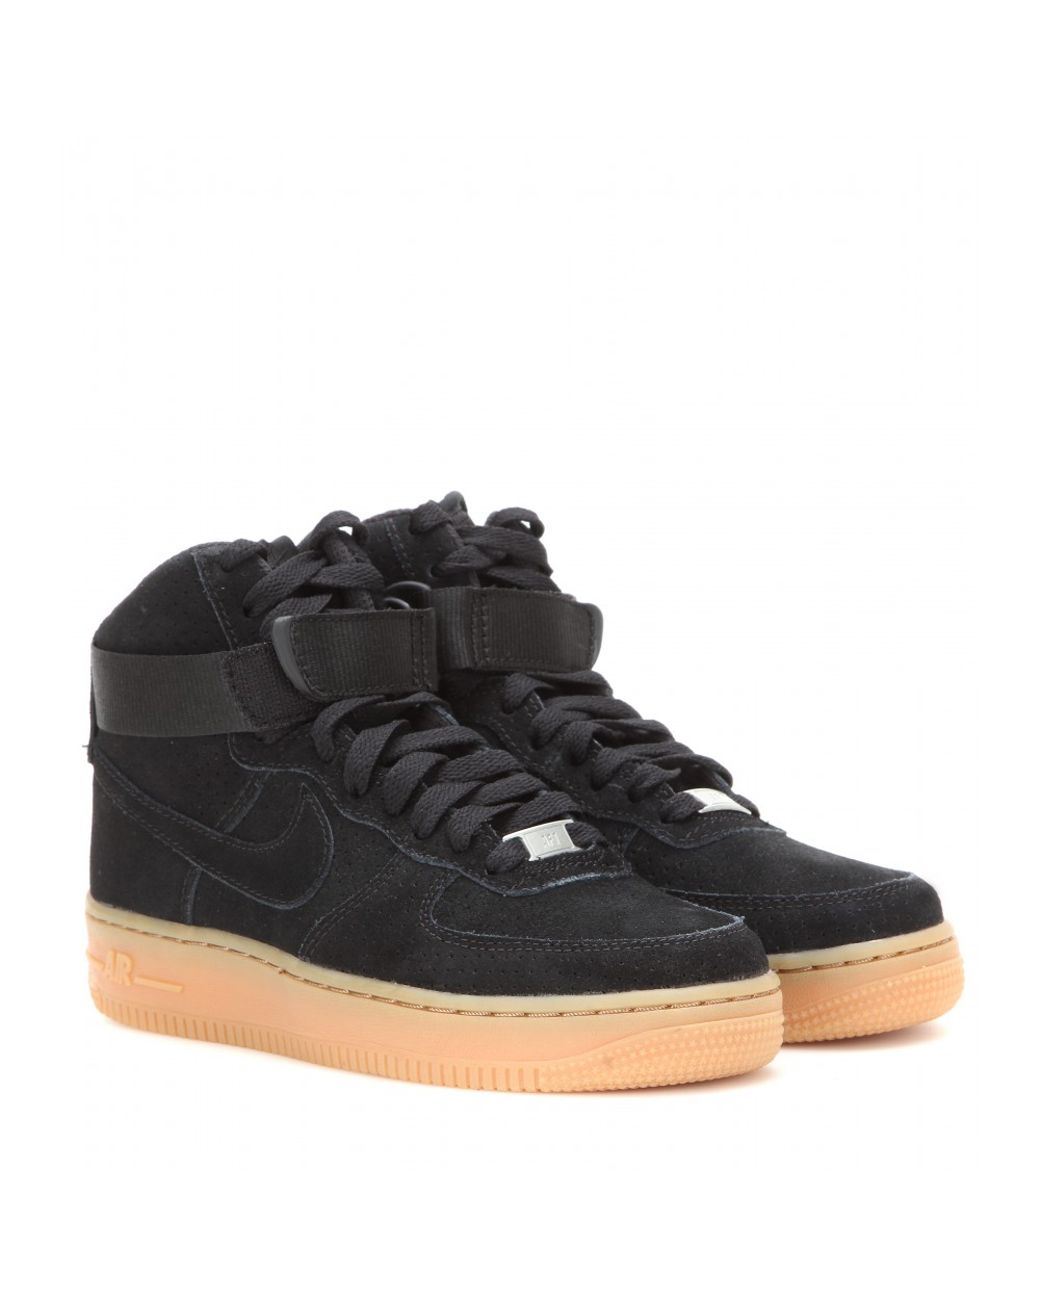 Cambiarse de ropa Sotavento rompecabezas Nike Air Force 1 Suede High-top Sneakers in Black | Lyst